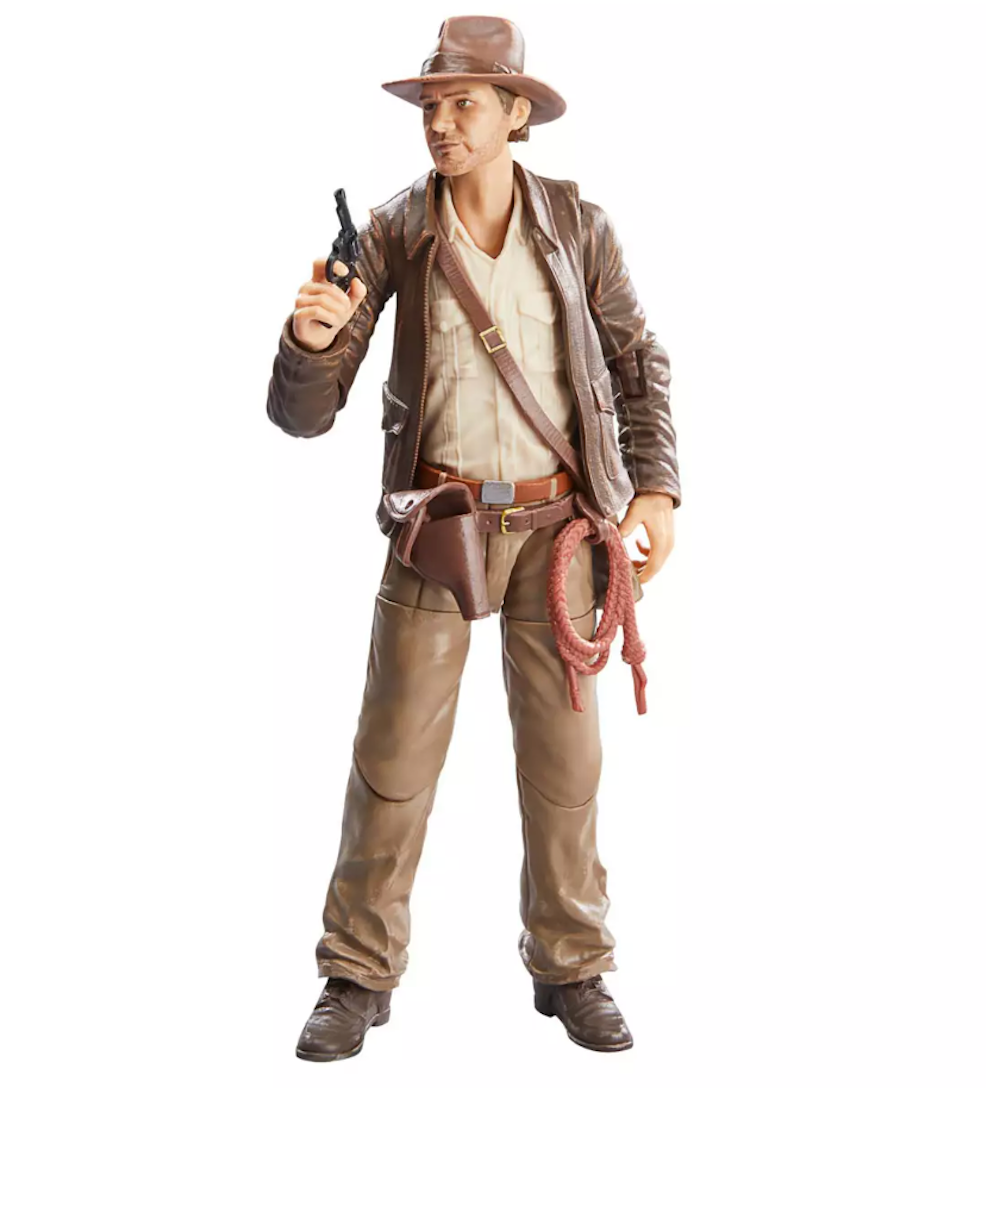 Disney Indiana Jones Temple Escape Action Figure by Hasbro New with Box